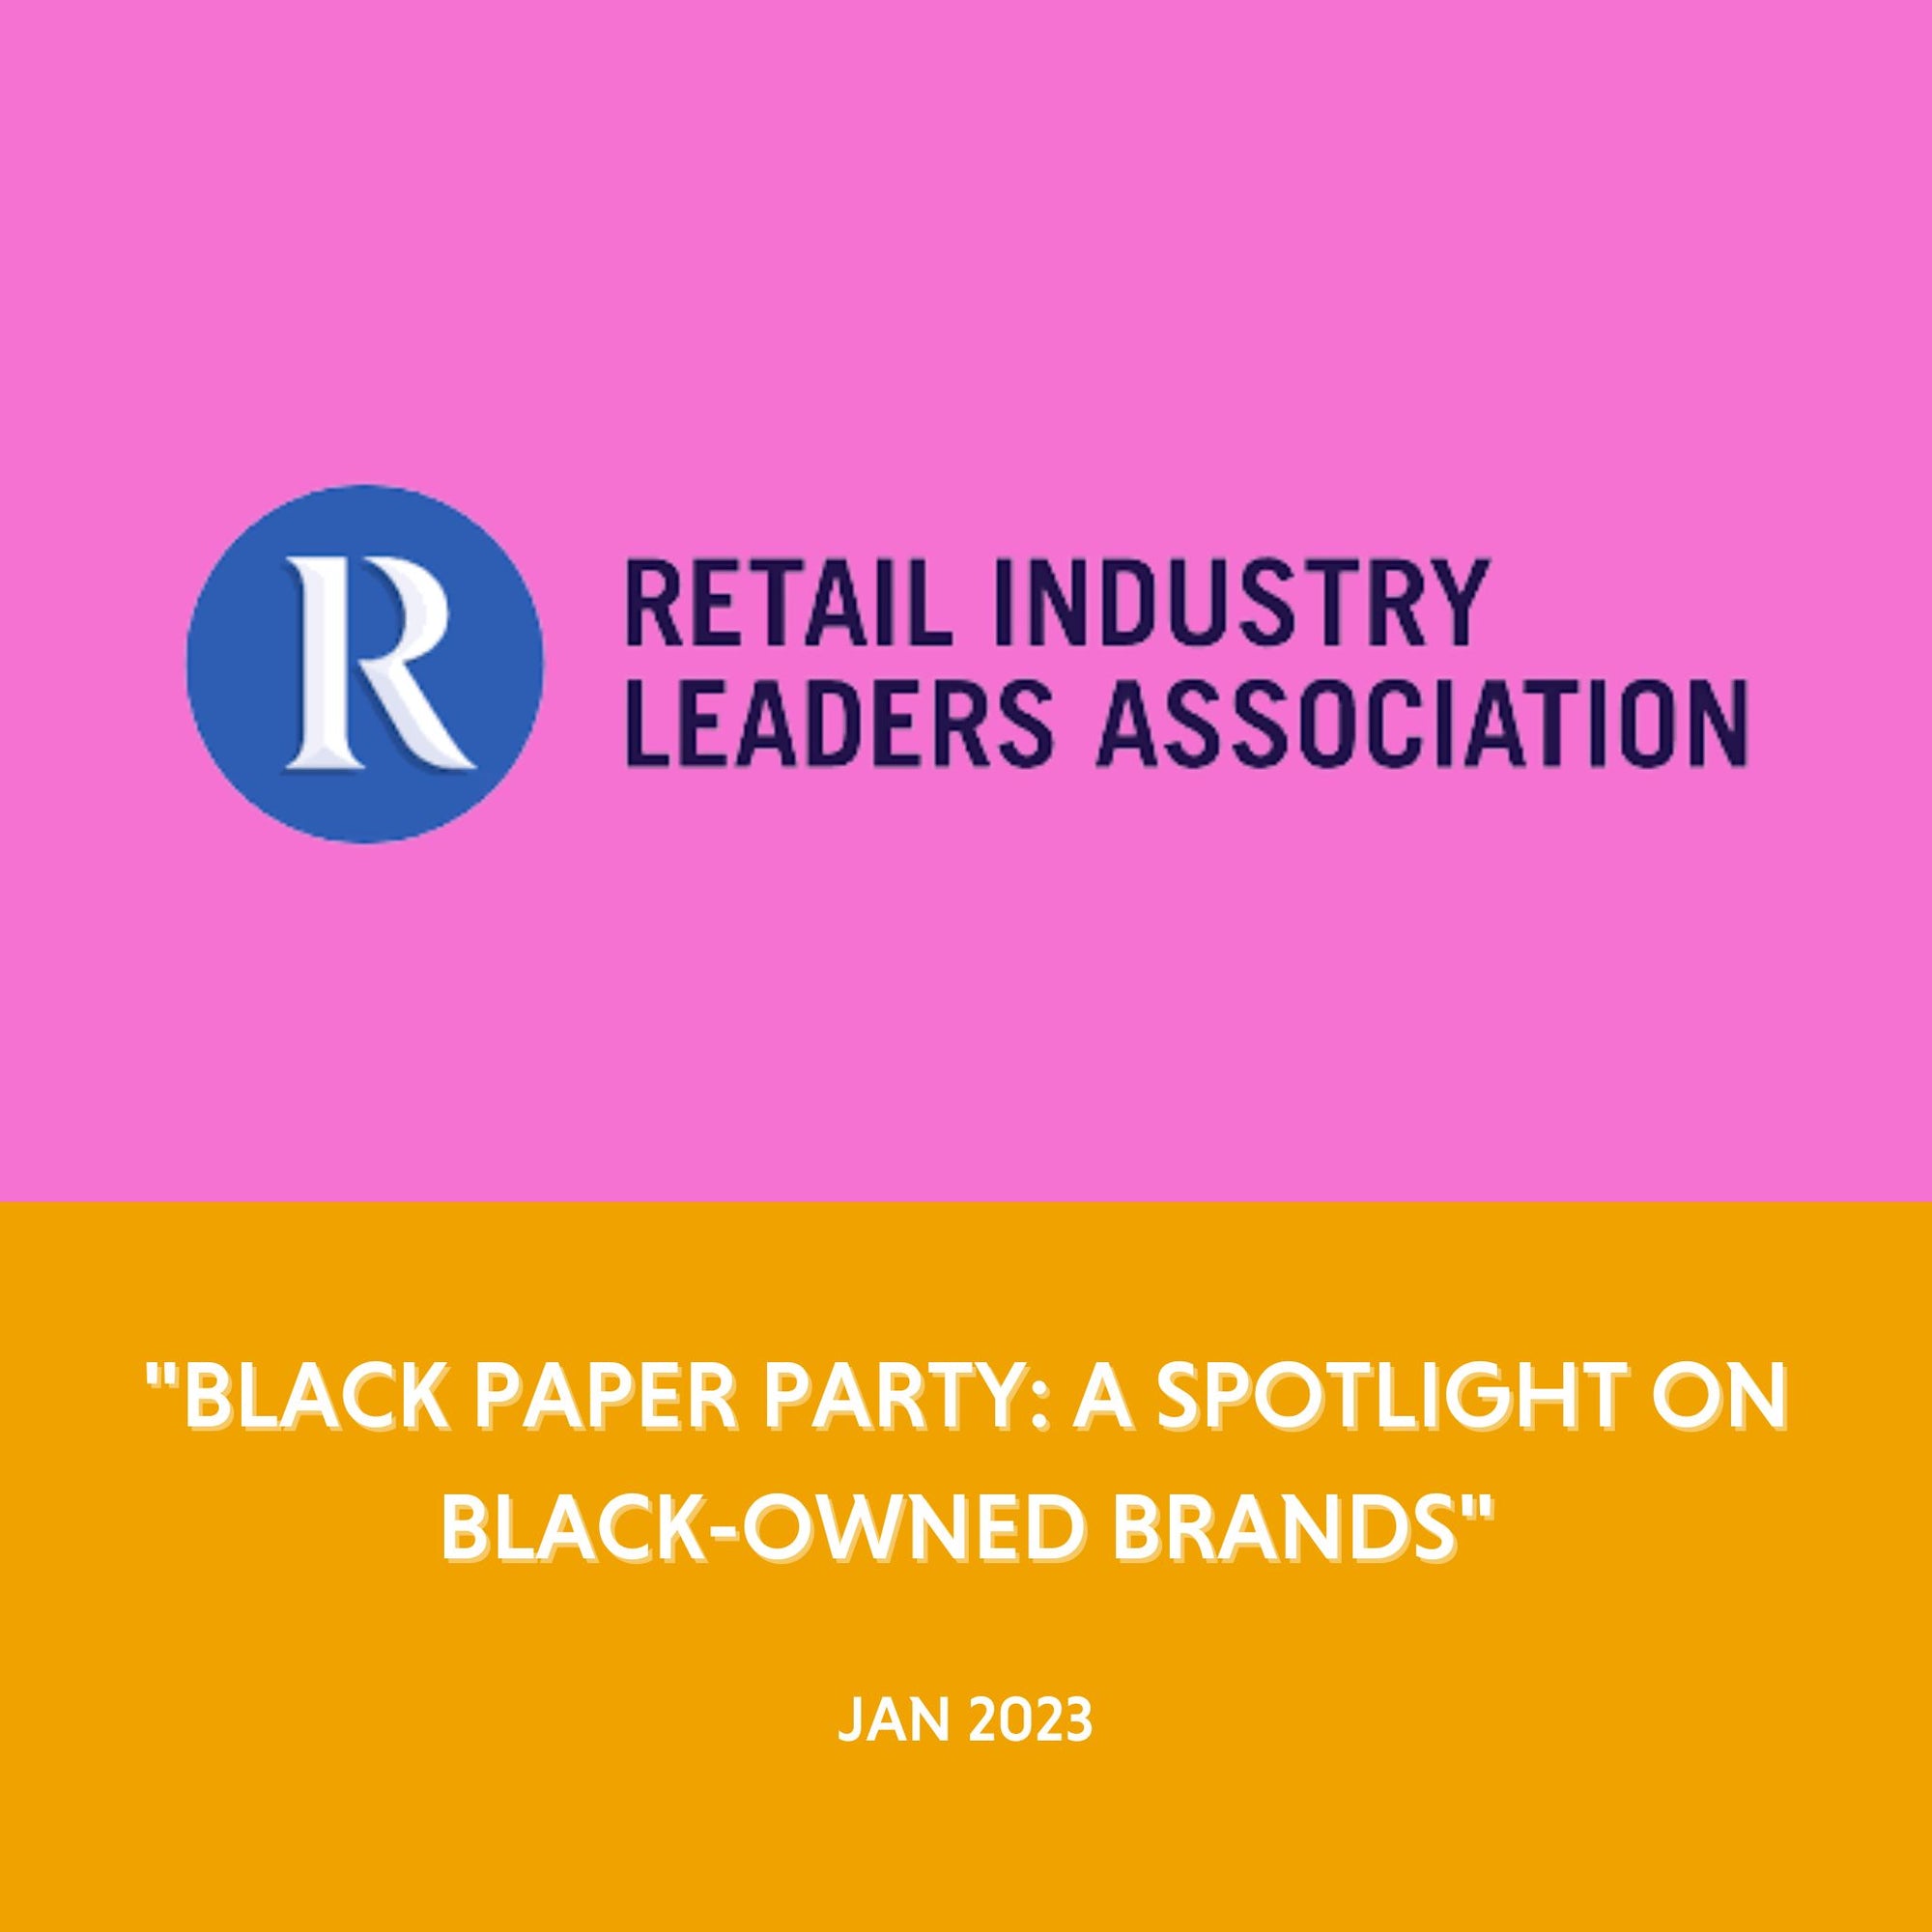 Retail Industry Leaders Association - "BLACK PAPER PARTY: A SPOTLIGHT ON BLACK-OWNED BRANDS" - Jan 2023